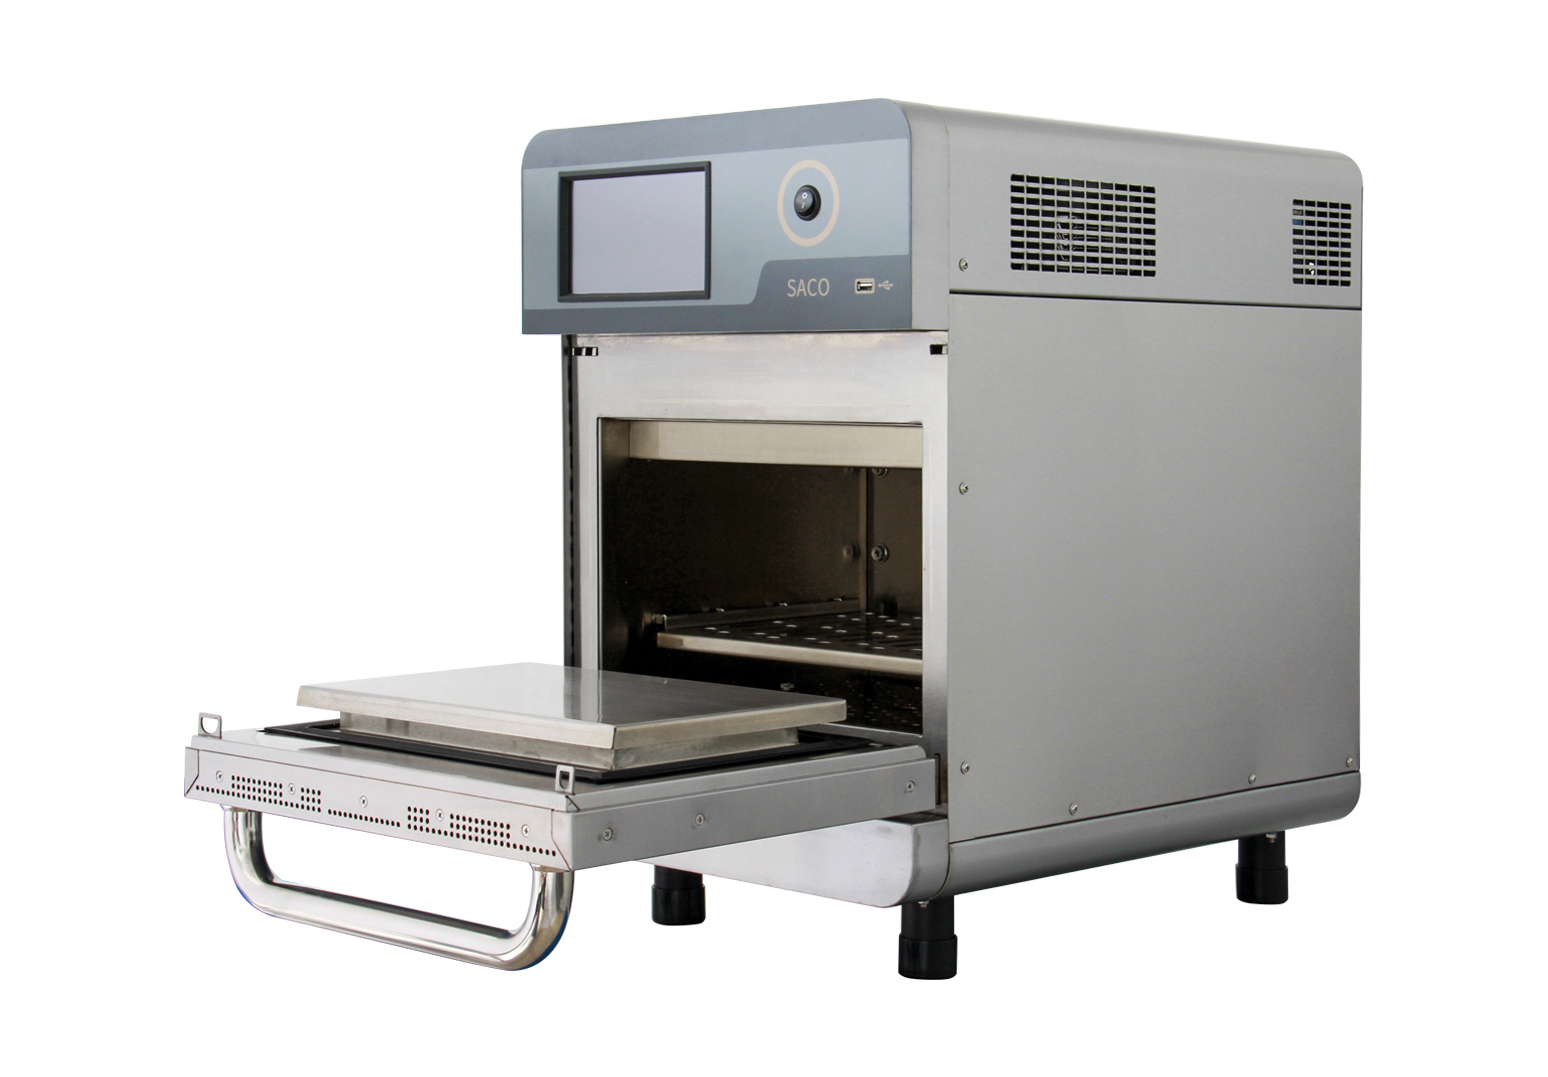 SACO V2 Model High-speed Accelerated Countertop Ventless Cooking Oven